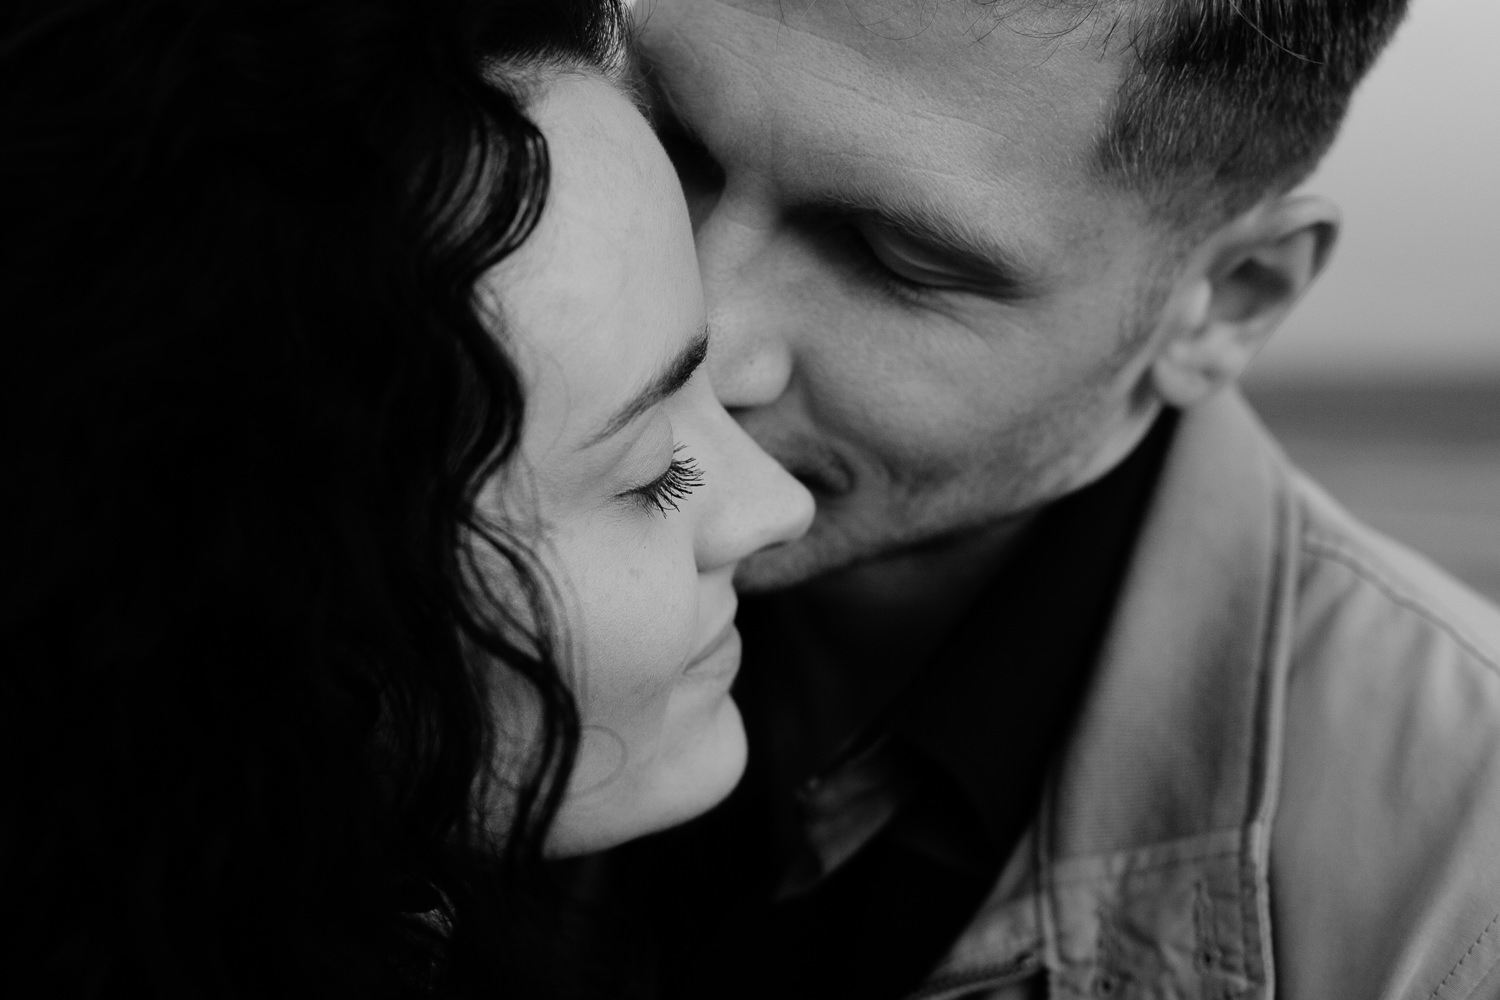 Black & White Kiss on the cheek - Intimate couple shoot at Wirral Counrty Park